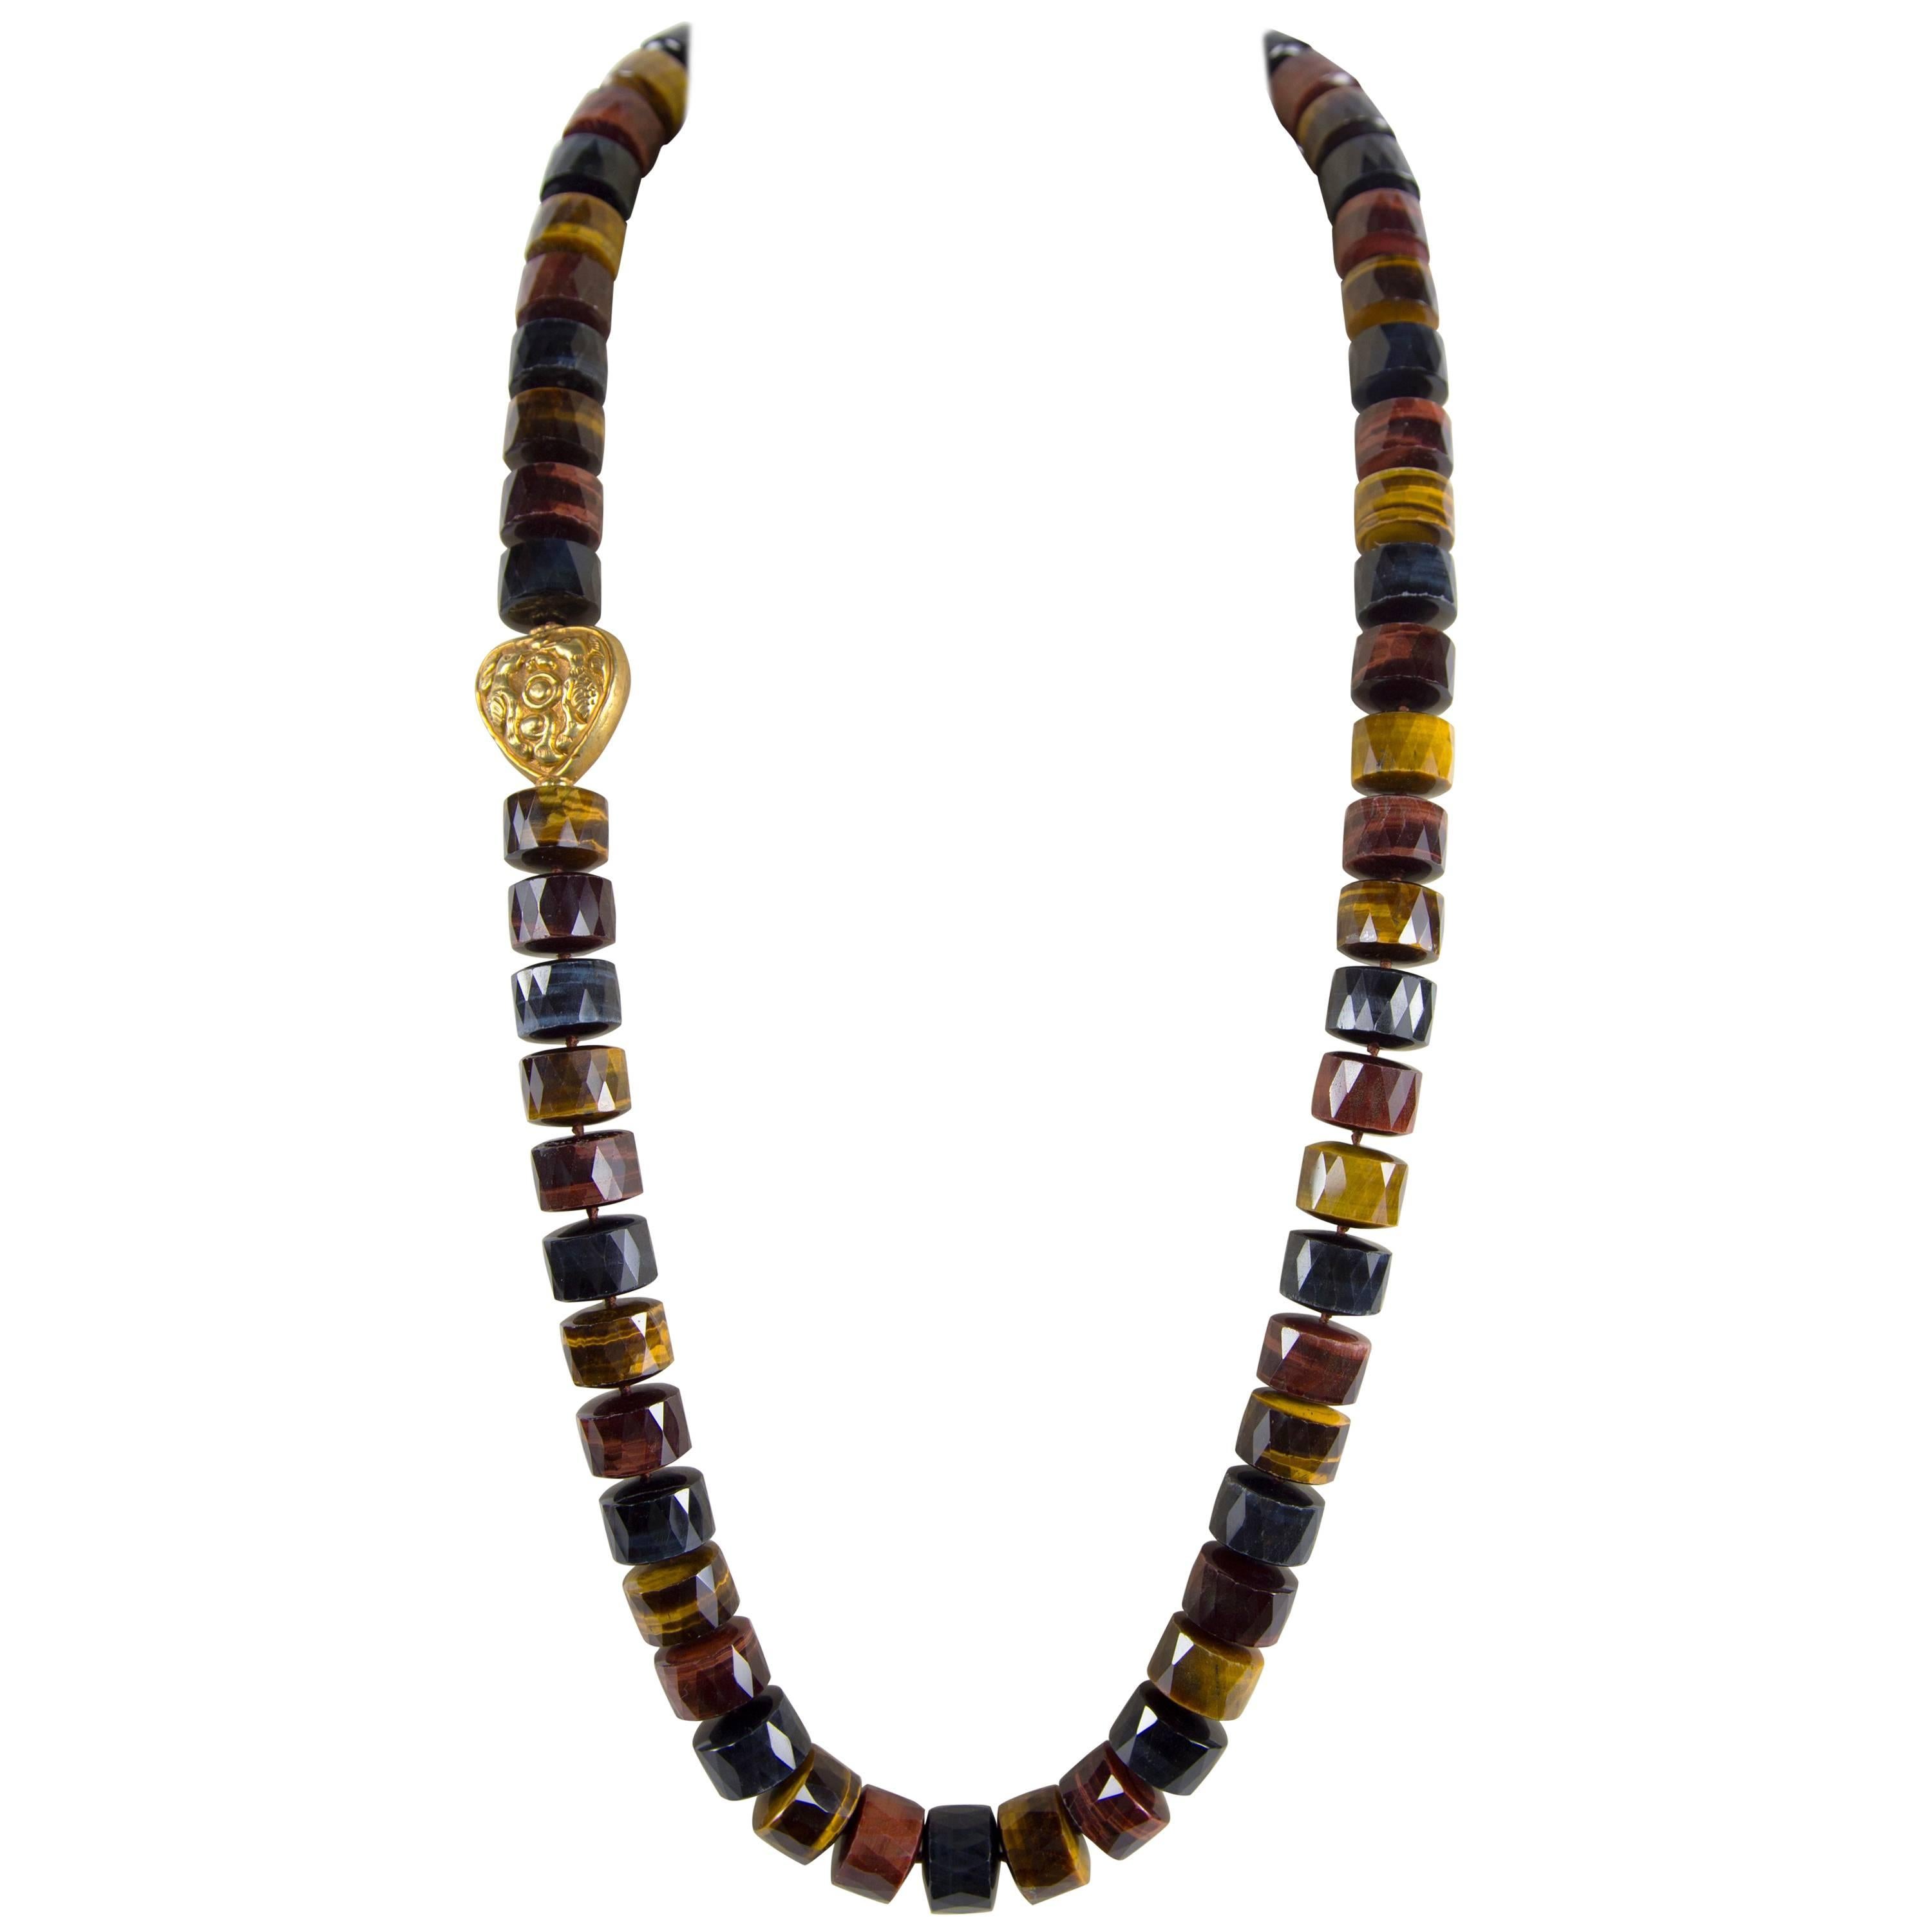 Beautiful Multi Color Tiger Eye and Gold Beads Runway Necklace Estate Find